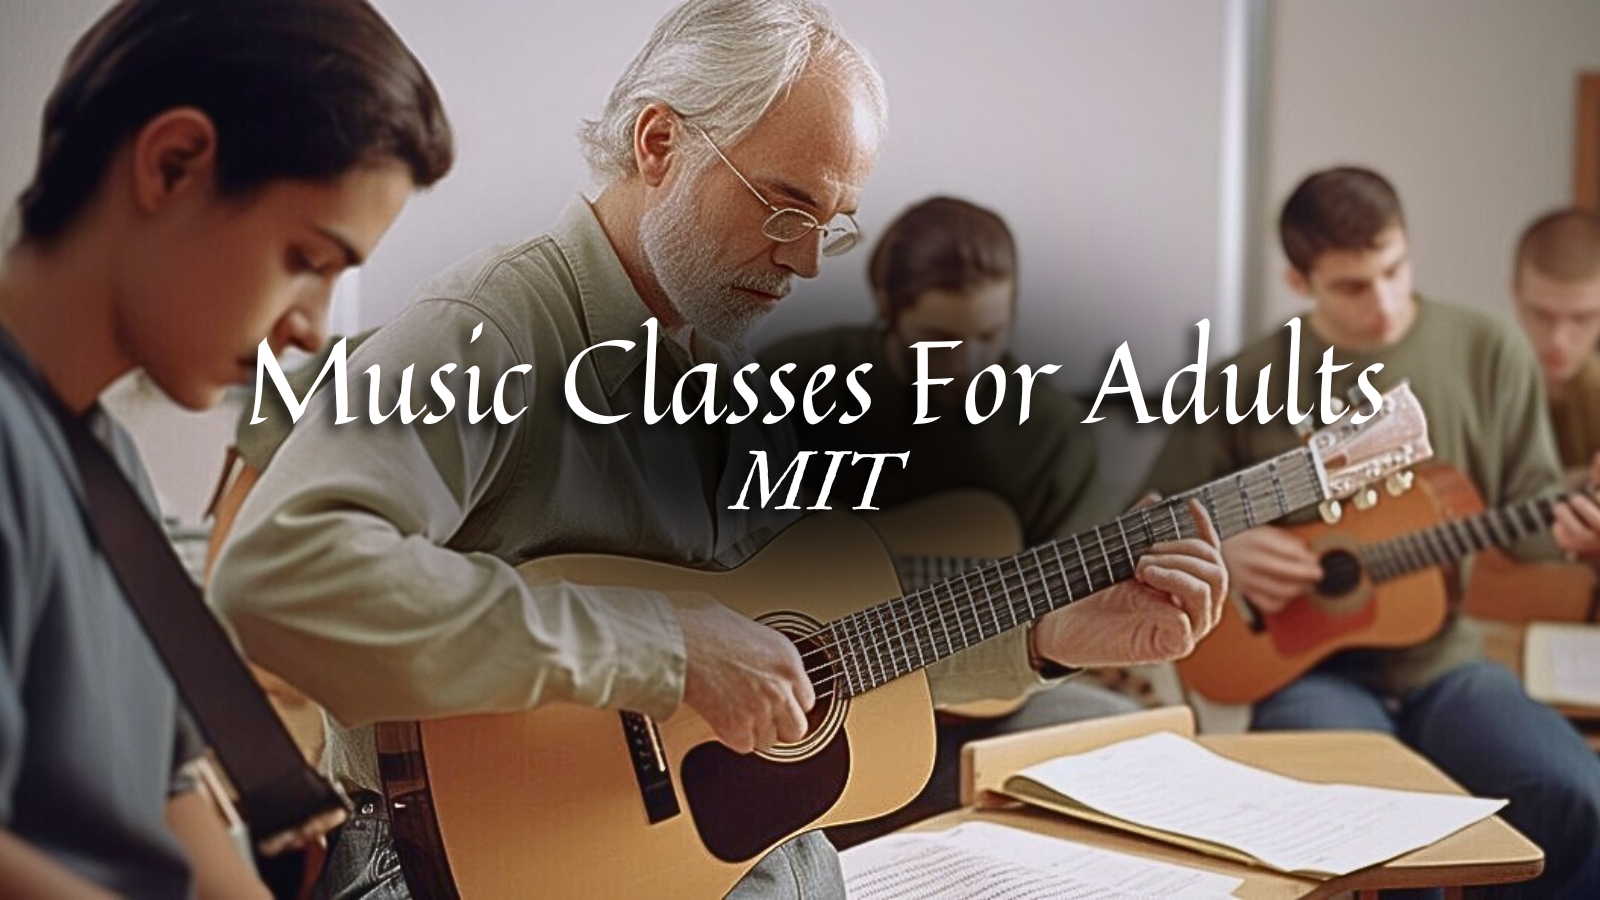 Music Classes for Adults in MIT, Massachusetts: Unlock Your Musical Potential at Musicians Playground